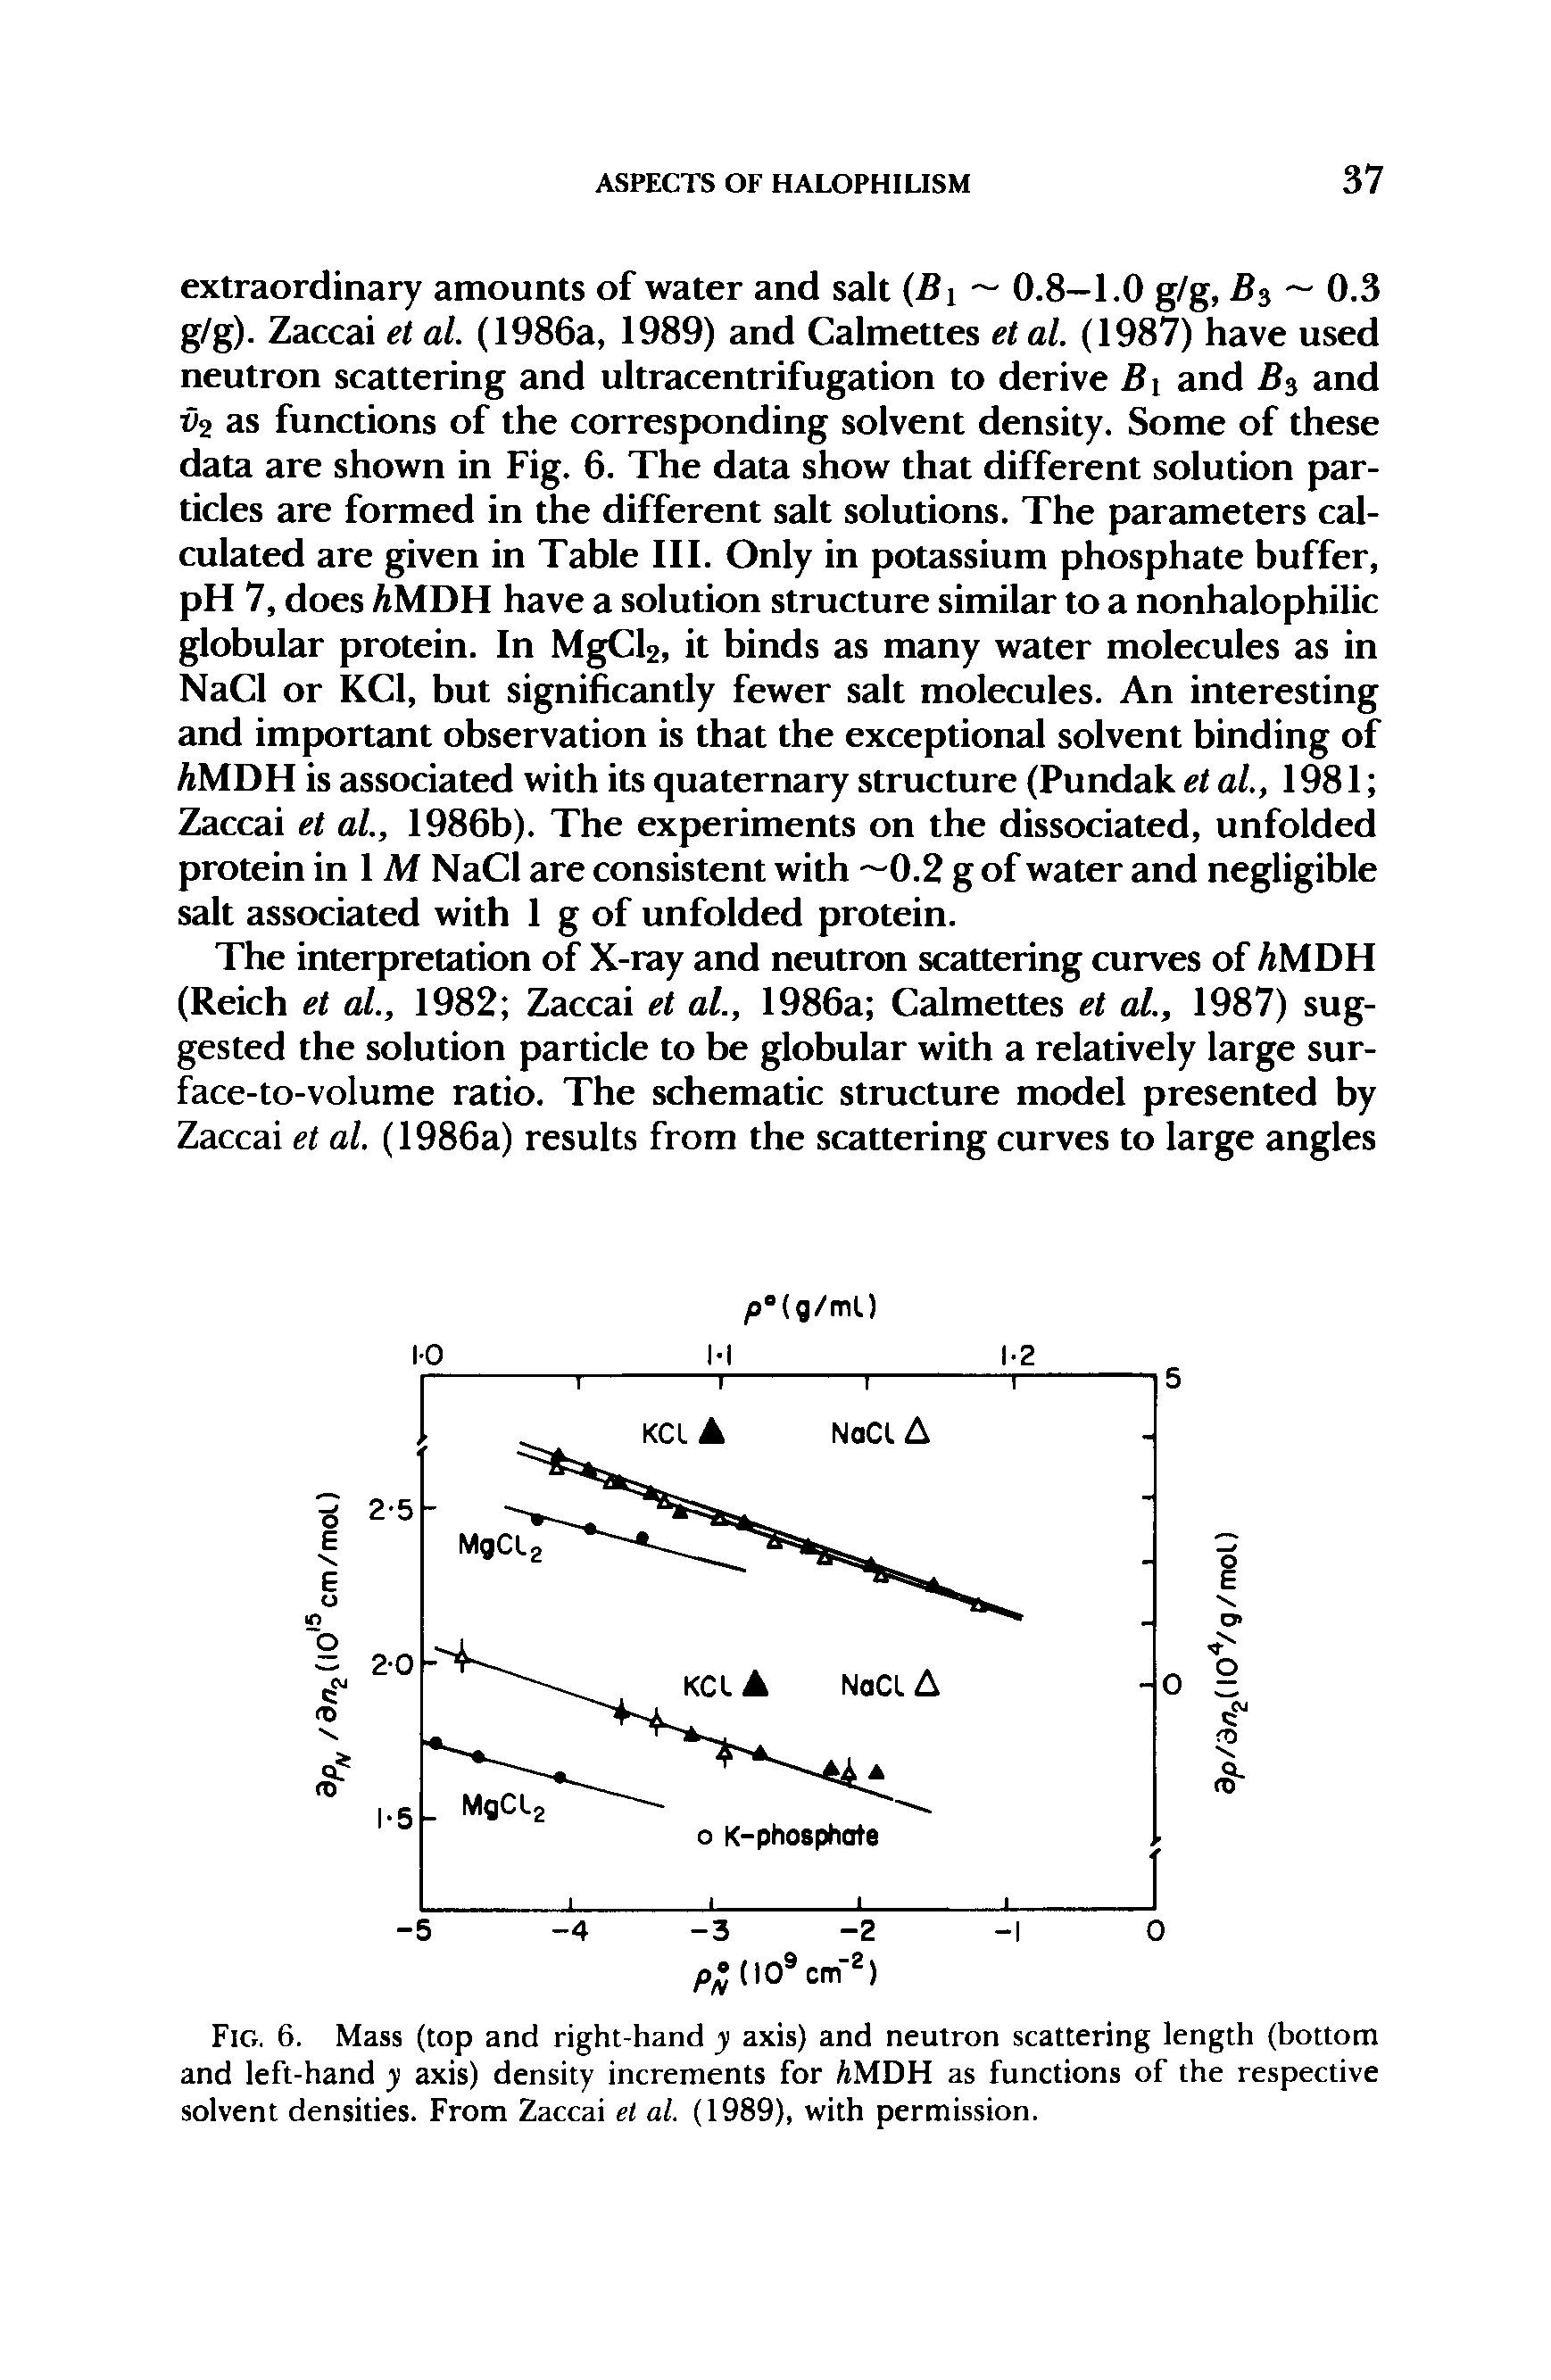 Fig. 6. Mass (top and right-hand y axis) and neutron scattering length (bottom and left-hand y axis) density increments for AMDH as functions of the respective solvent densities. From Zaccai et al. (1989), with permission.